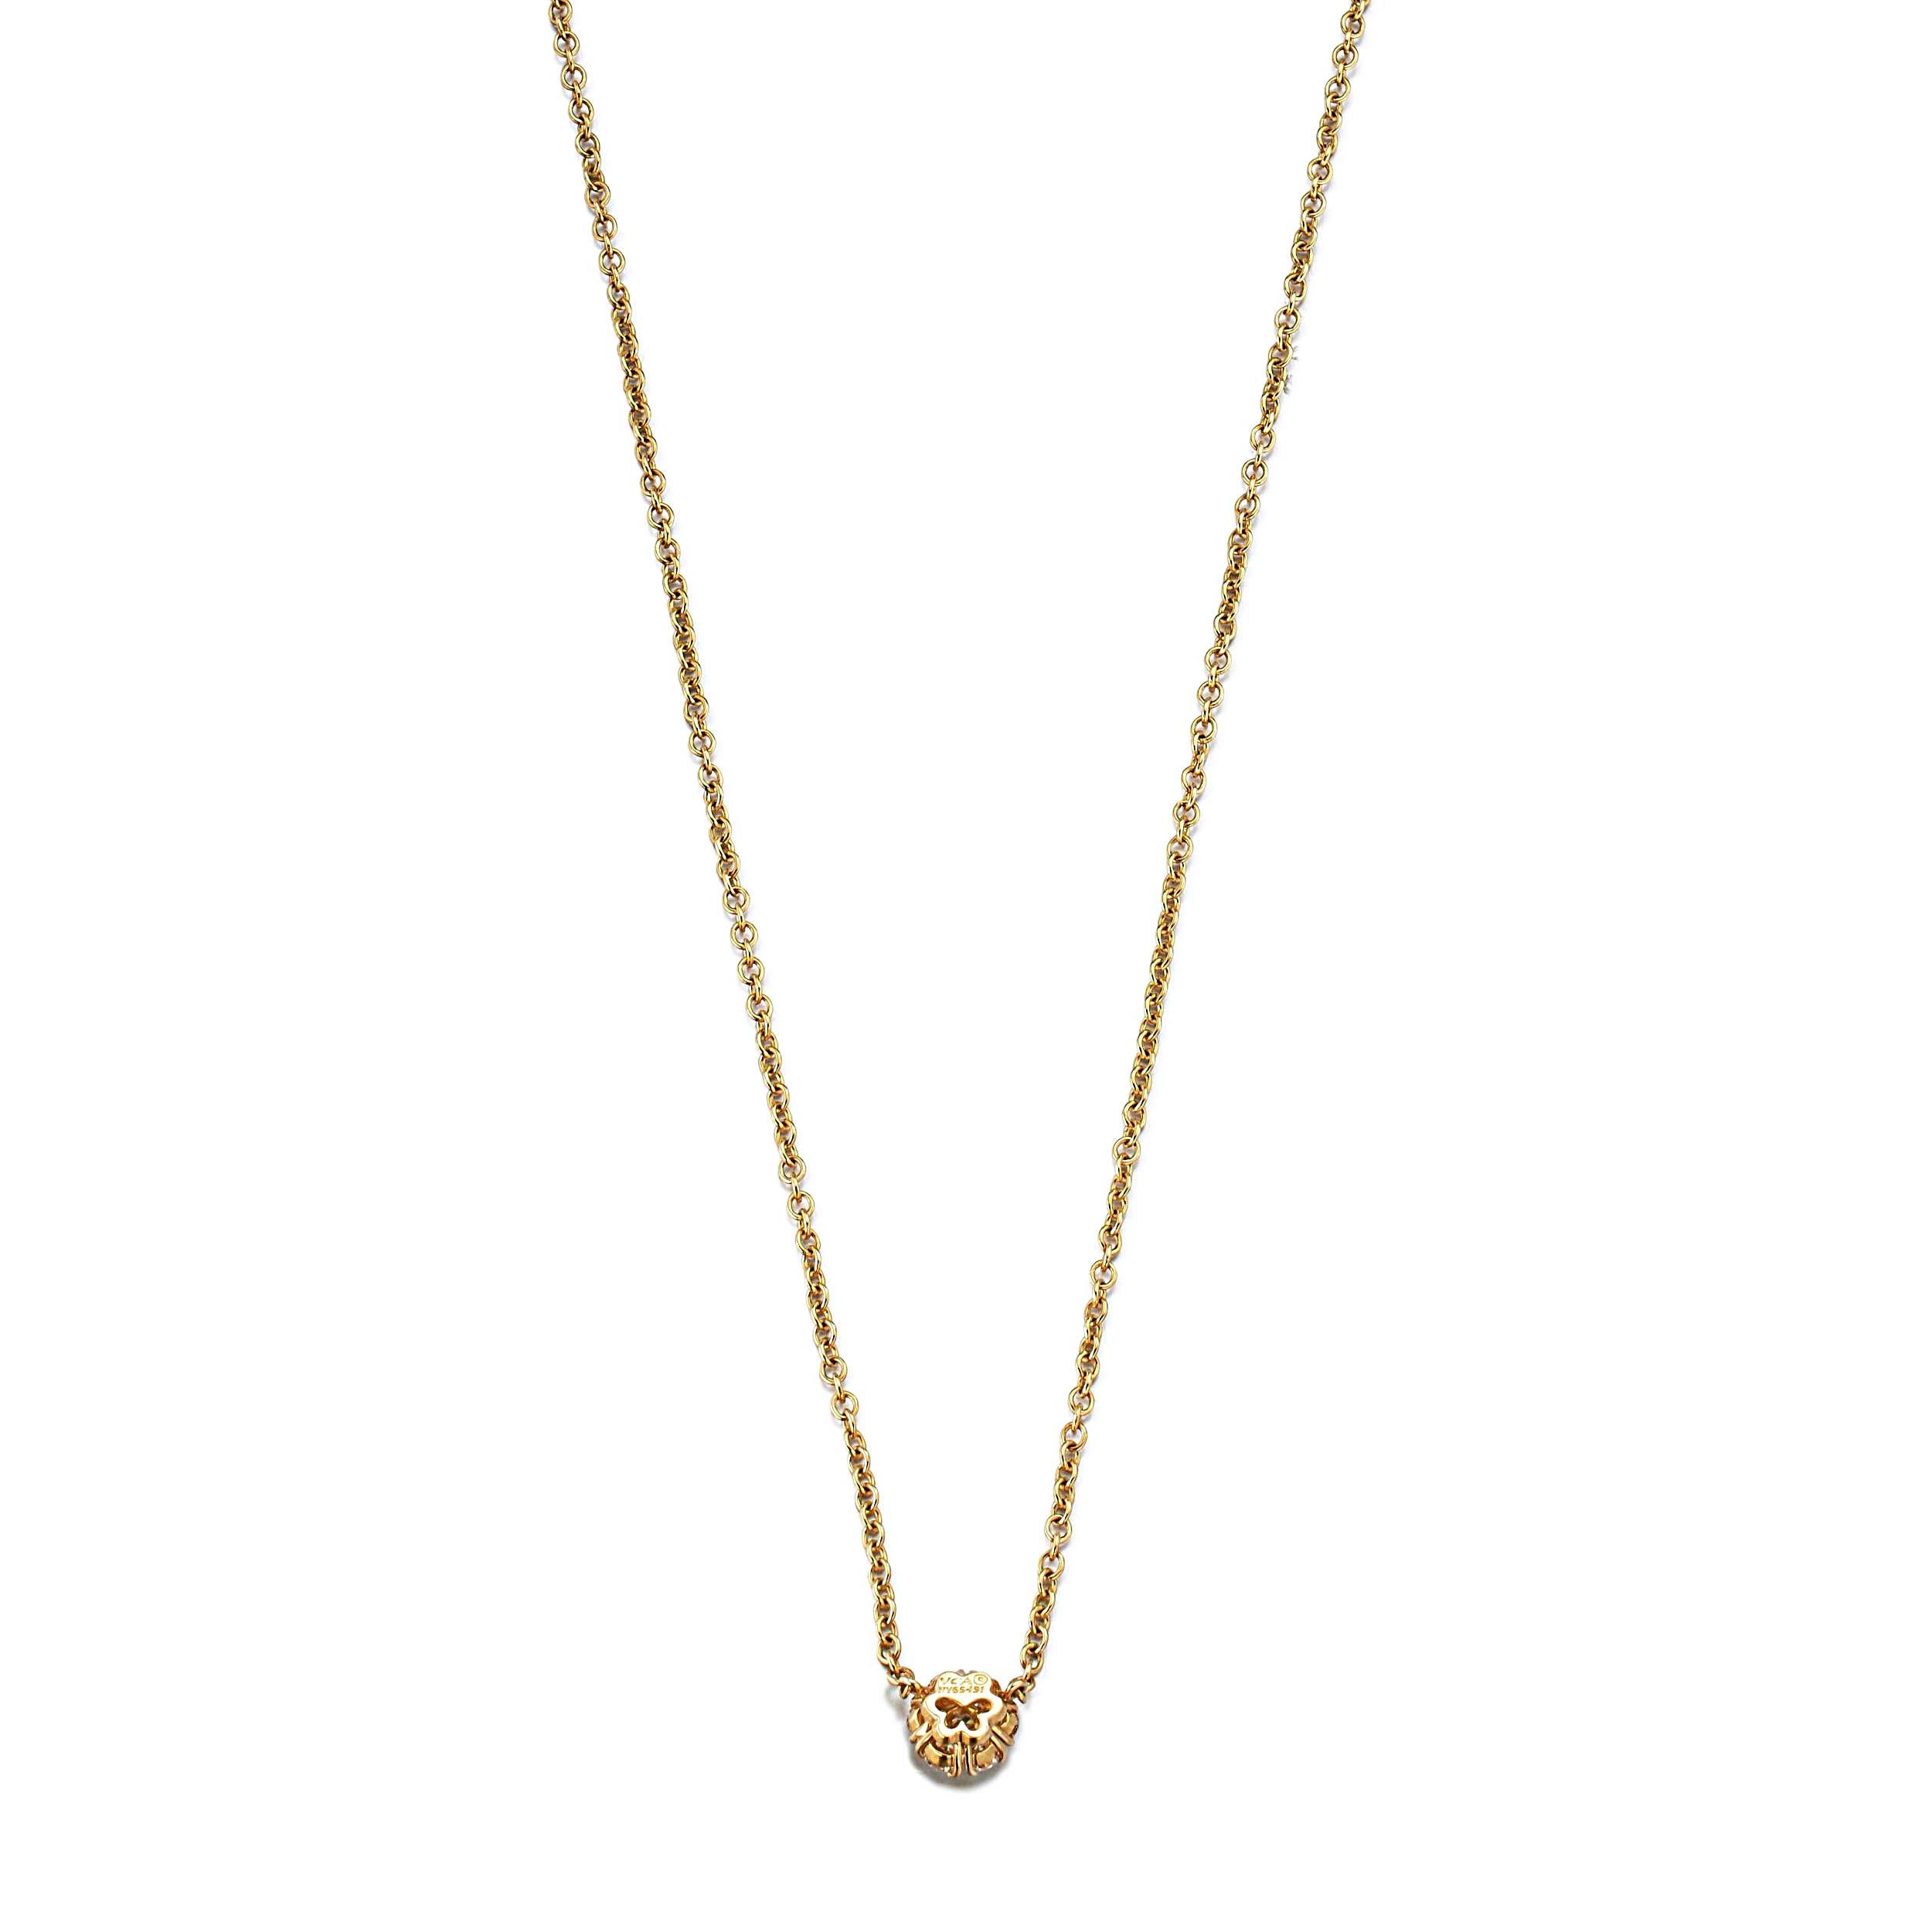 The Van Cleef & Arpels Fleurette Diamond Yellow Gold Pendant Necklace is an embodiment of sophistication and timeless elegance, reflecting the brand's commitment to beauty and excellence in craftsmanship. This exquisite piece is a part of the